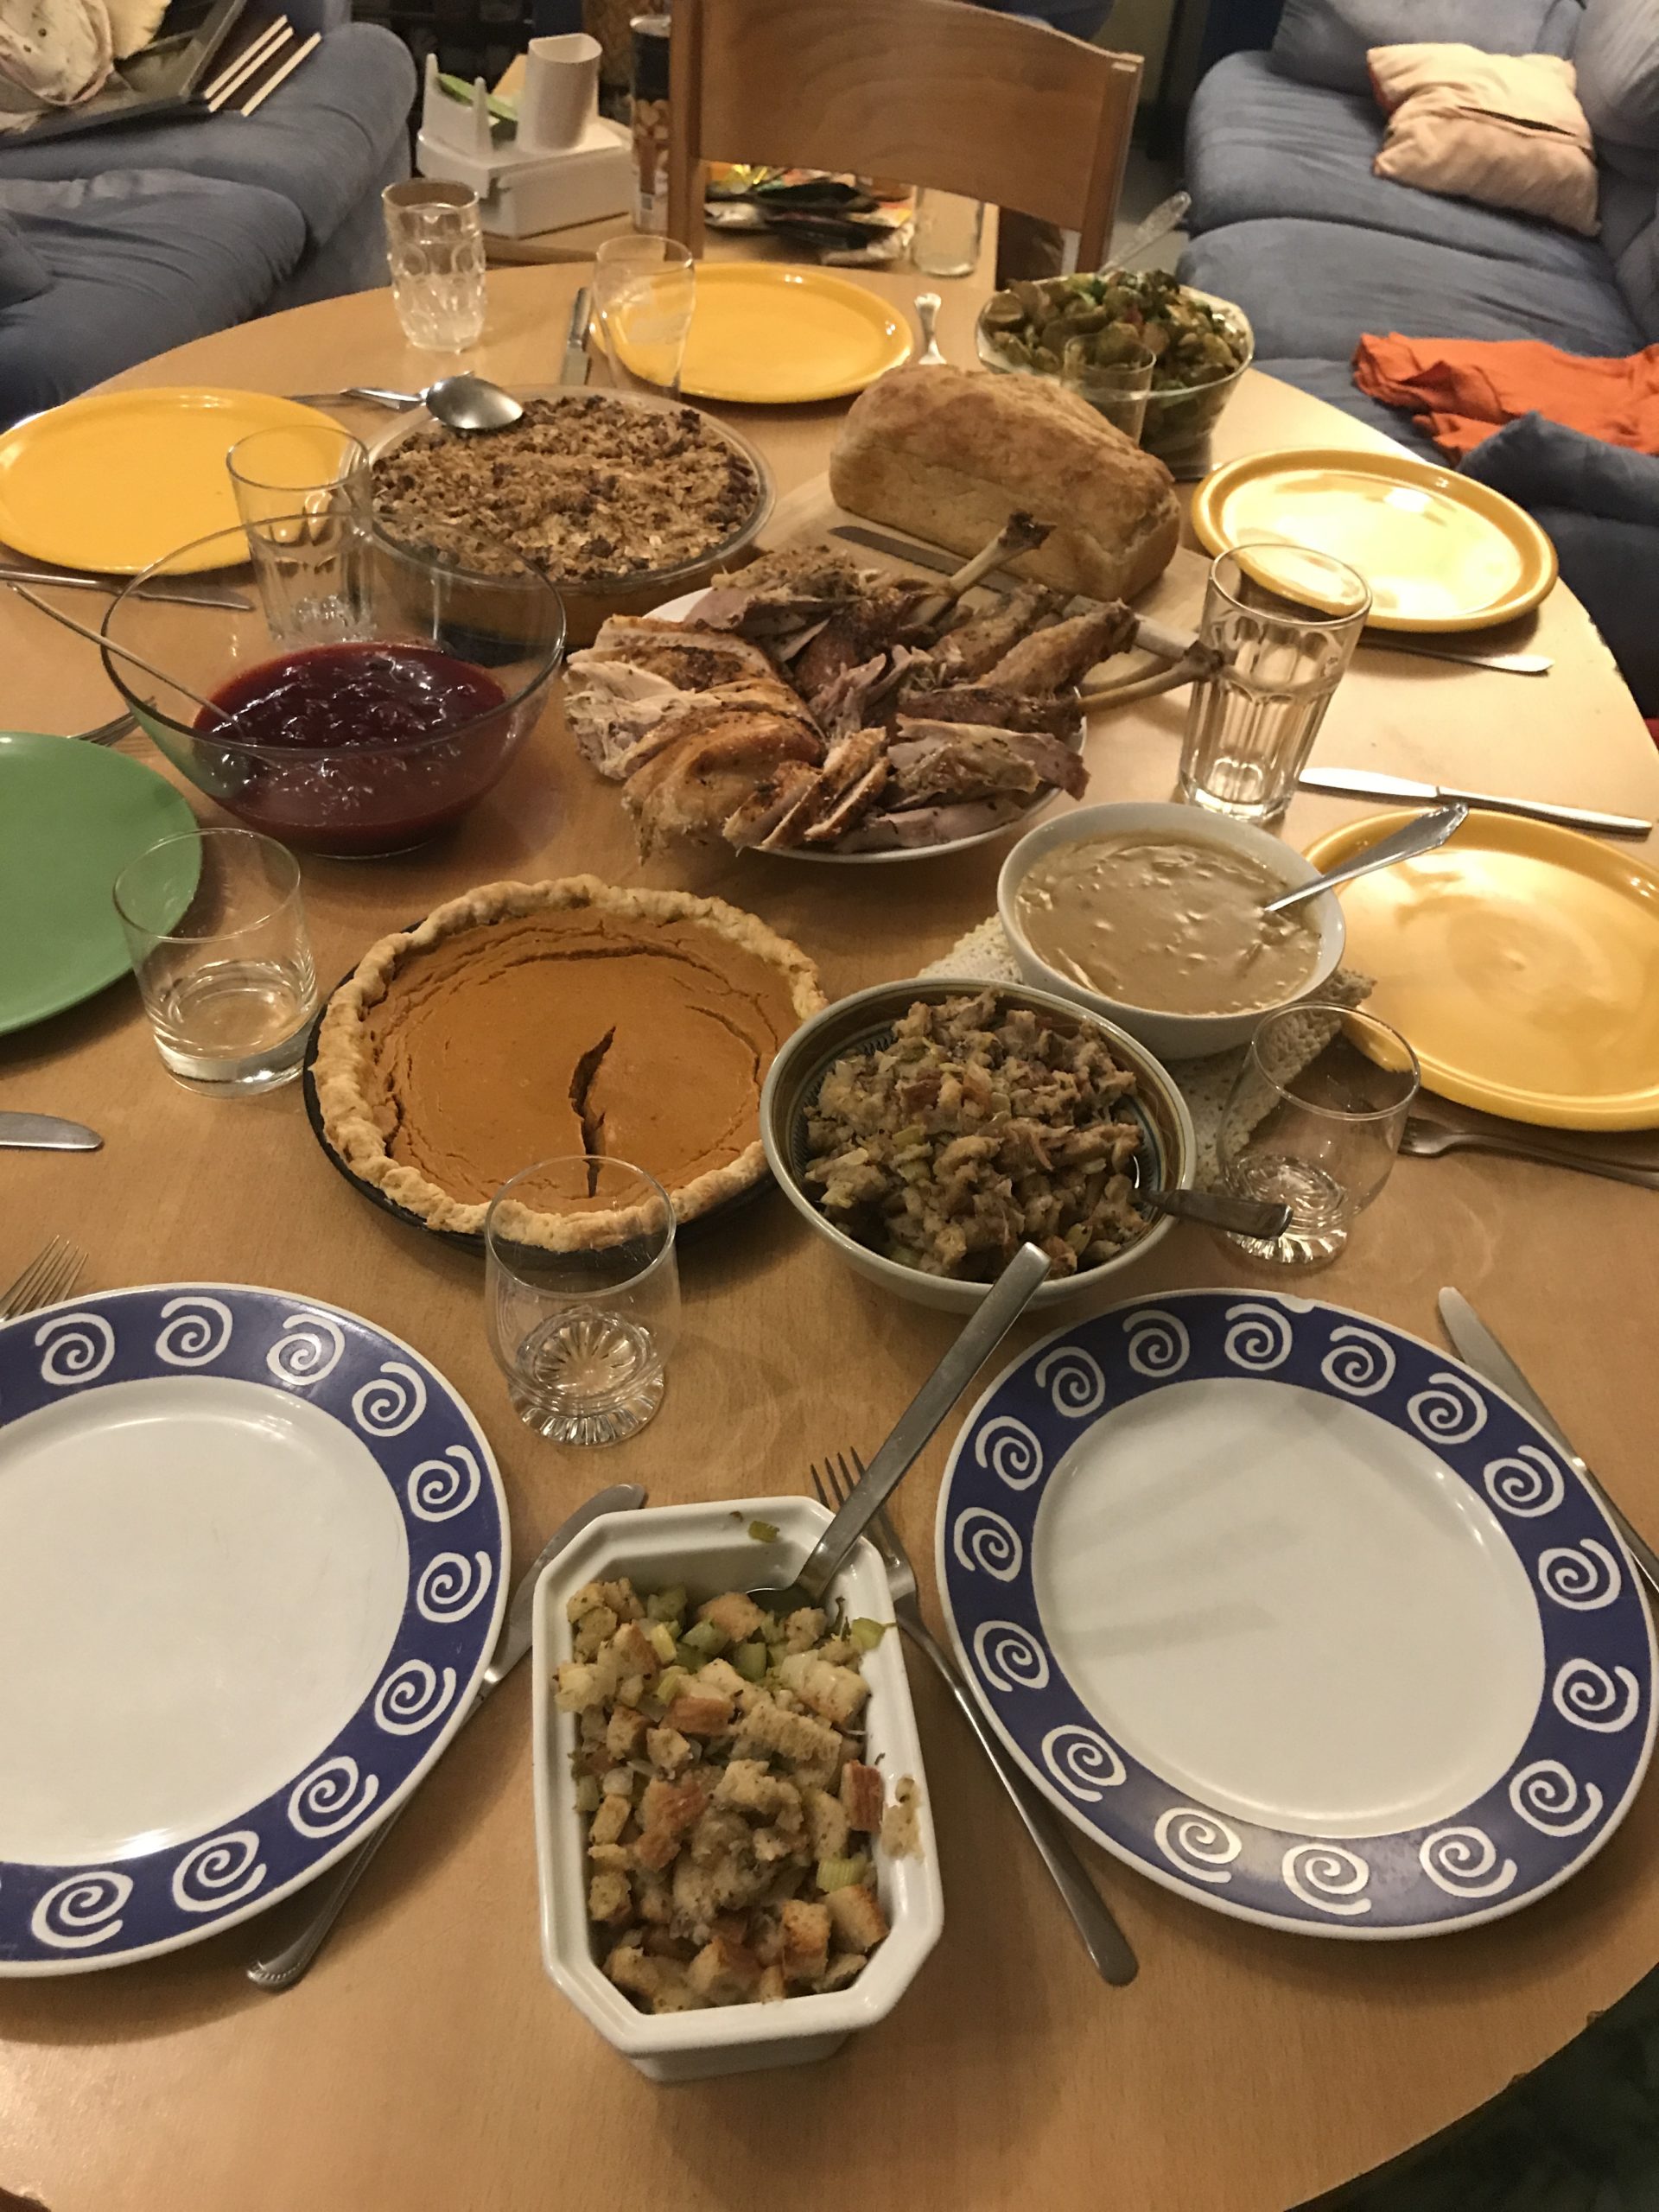 Thanksgiving in Germany!